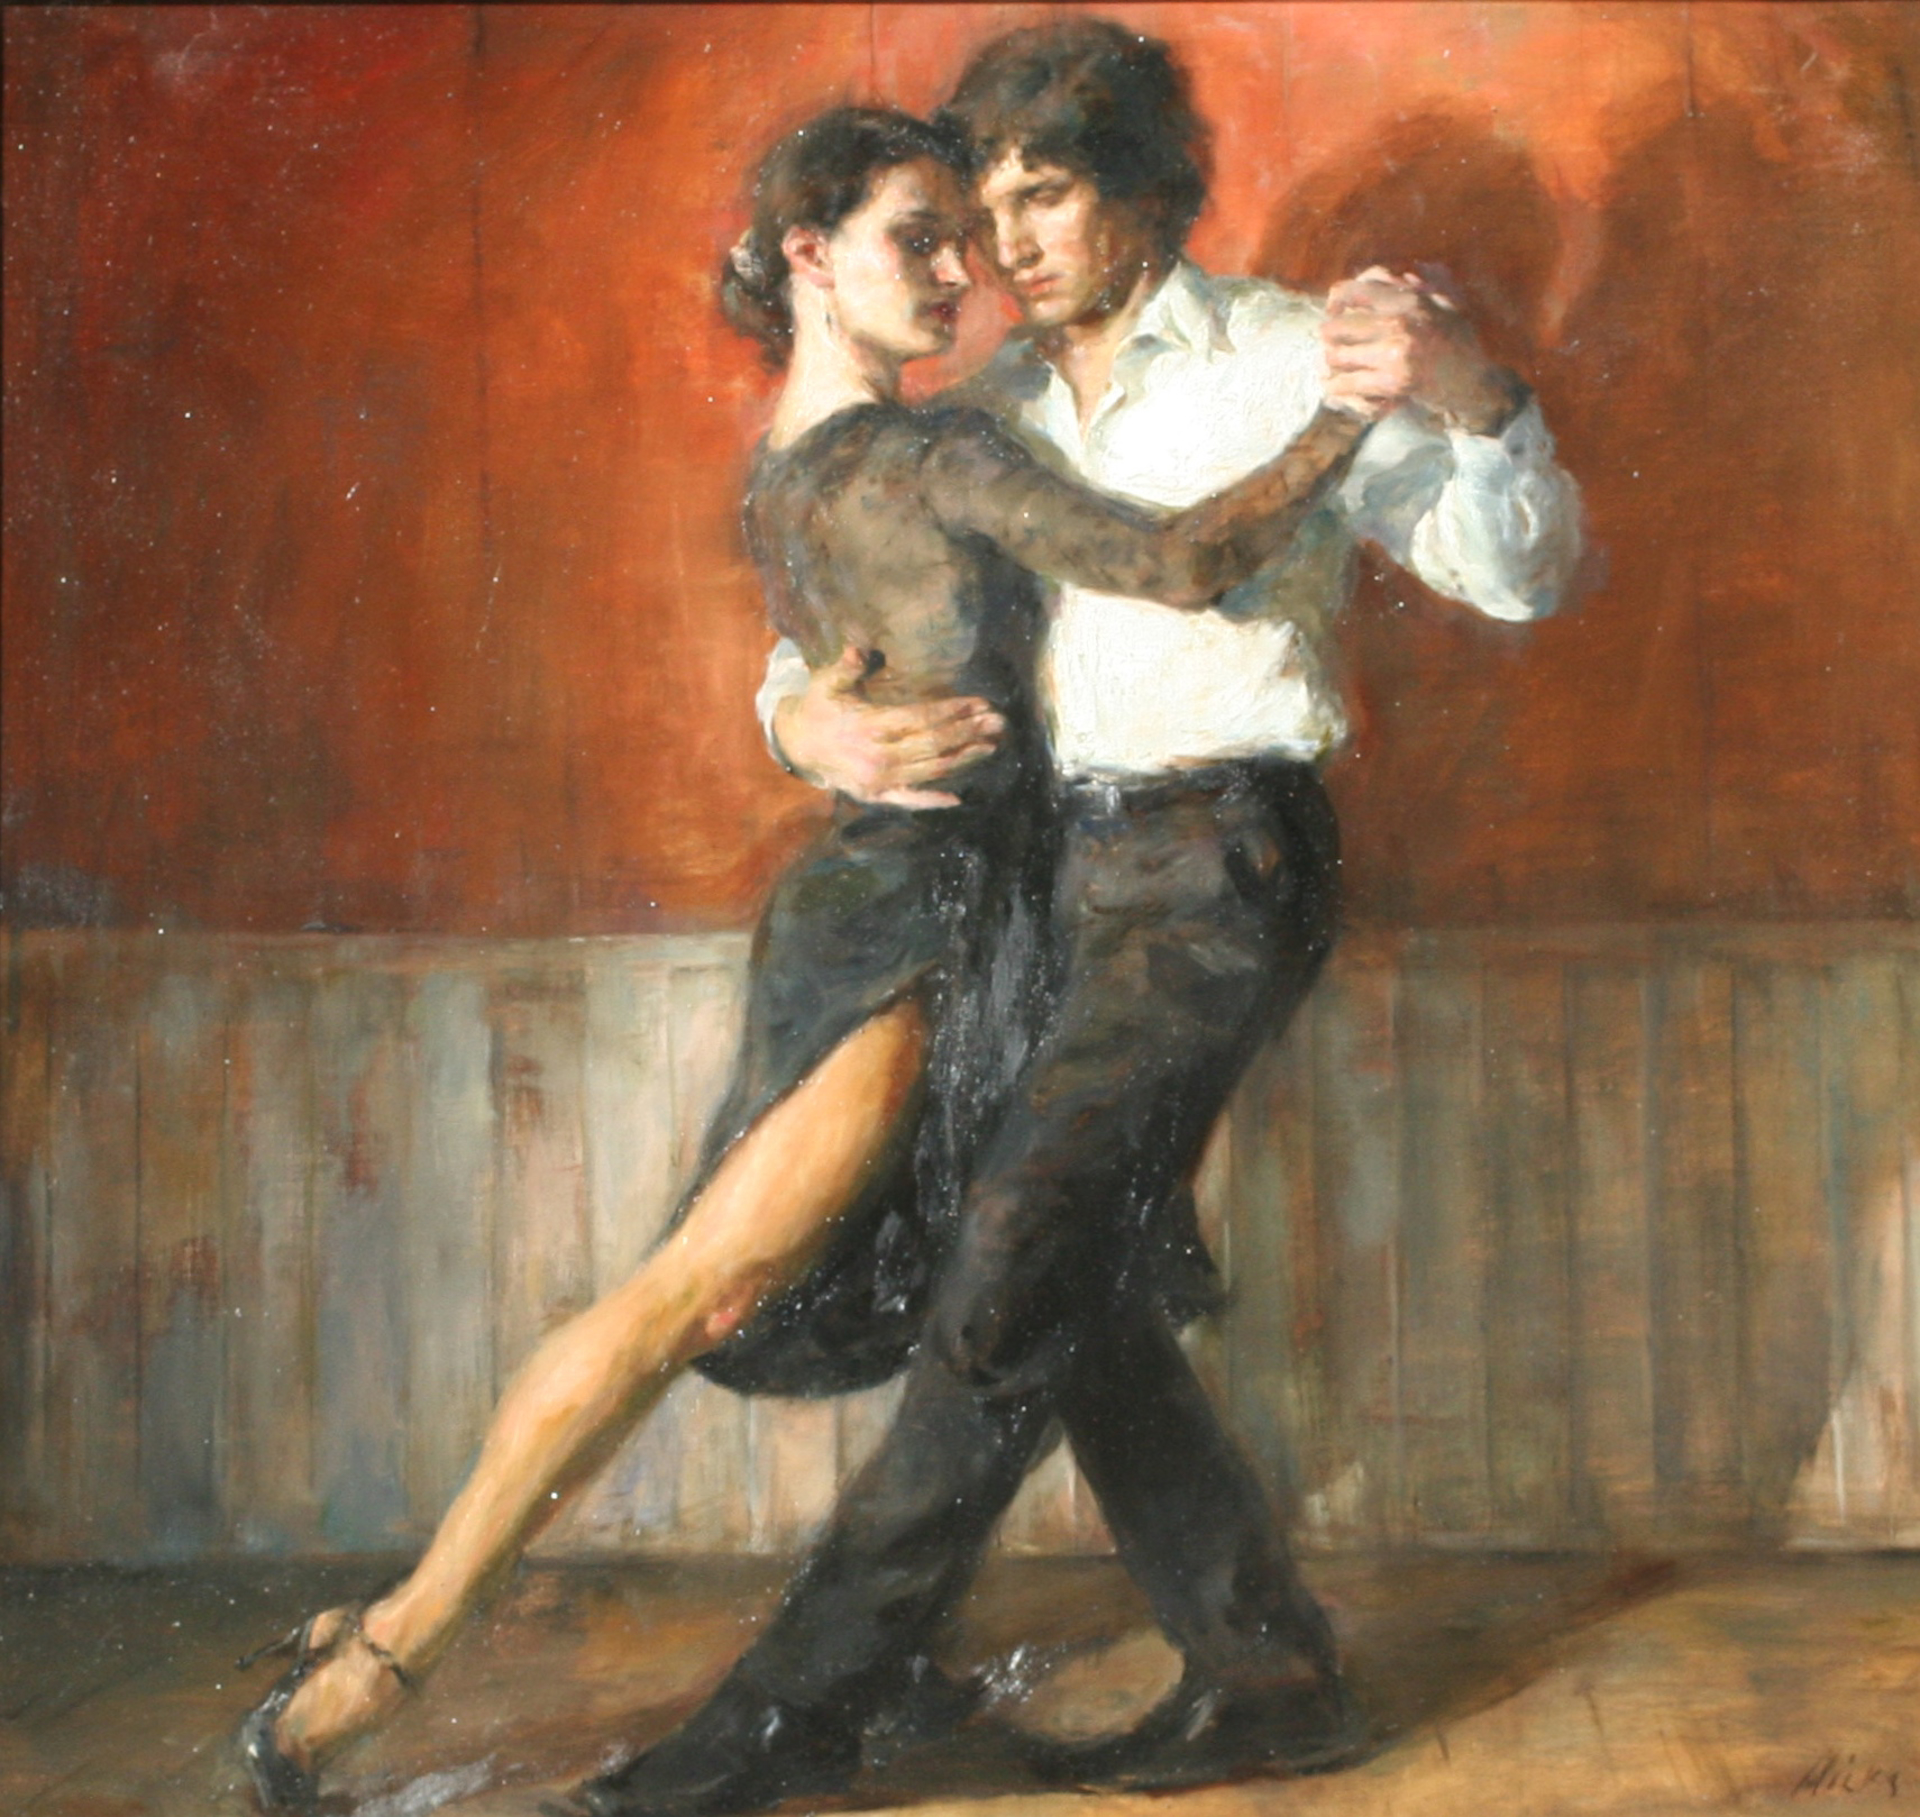 Two to Tango by Ron Hicks